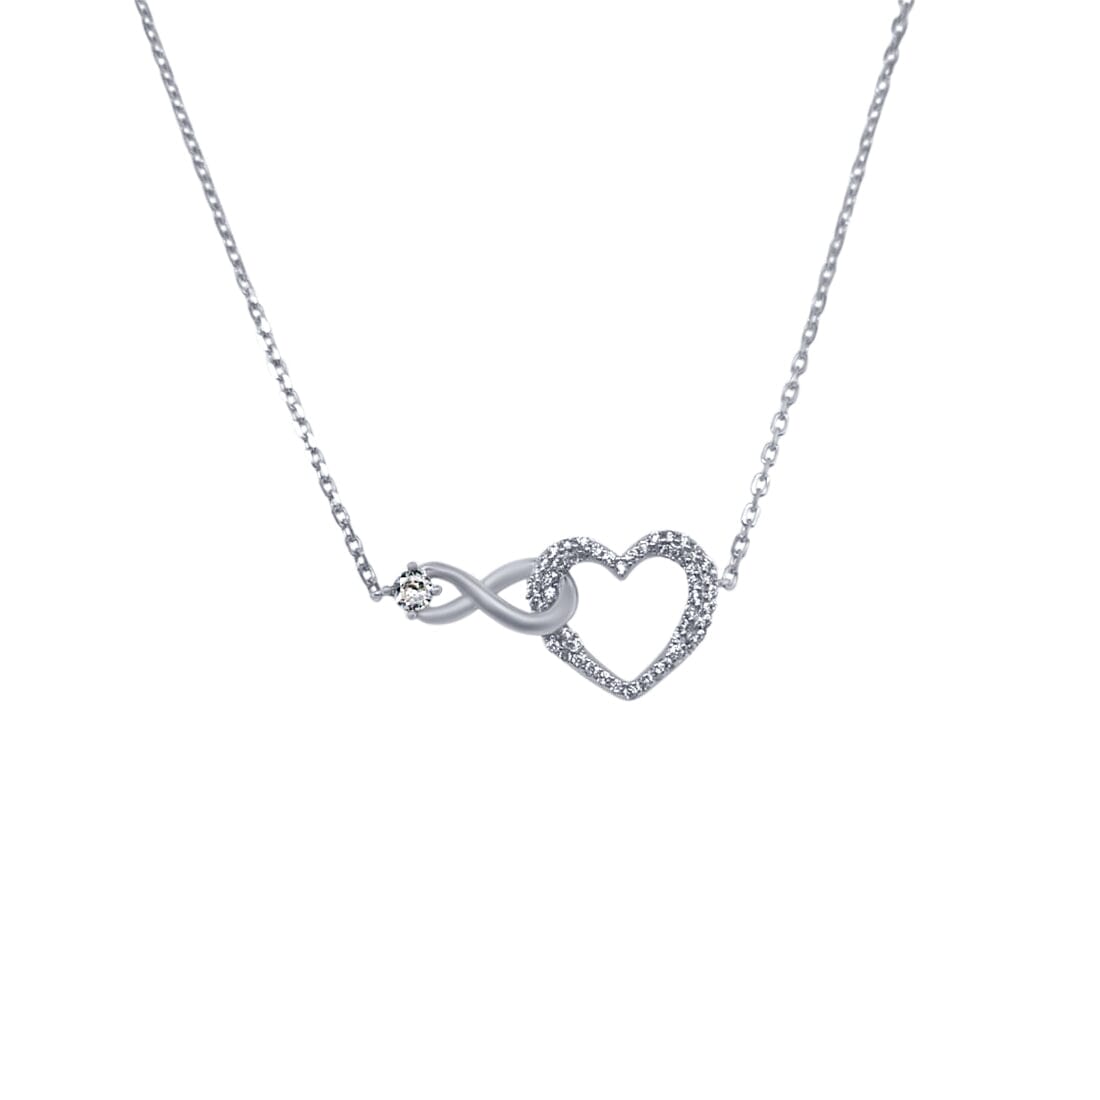 45cm Infinity and Heart Necklace with Cubic Zirconia in Sterling Silver Necklaces Bevilles 